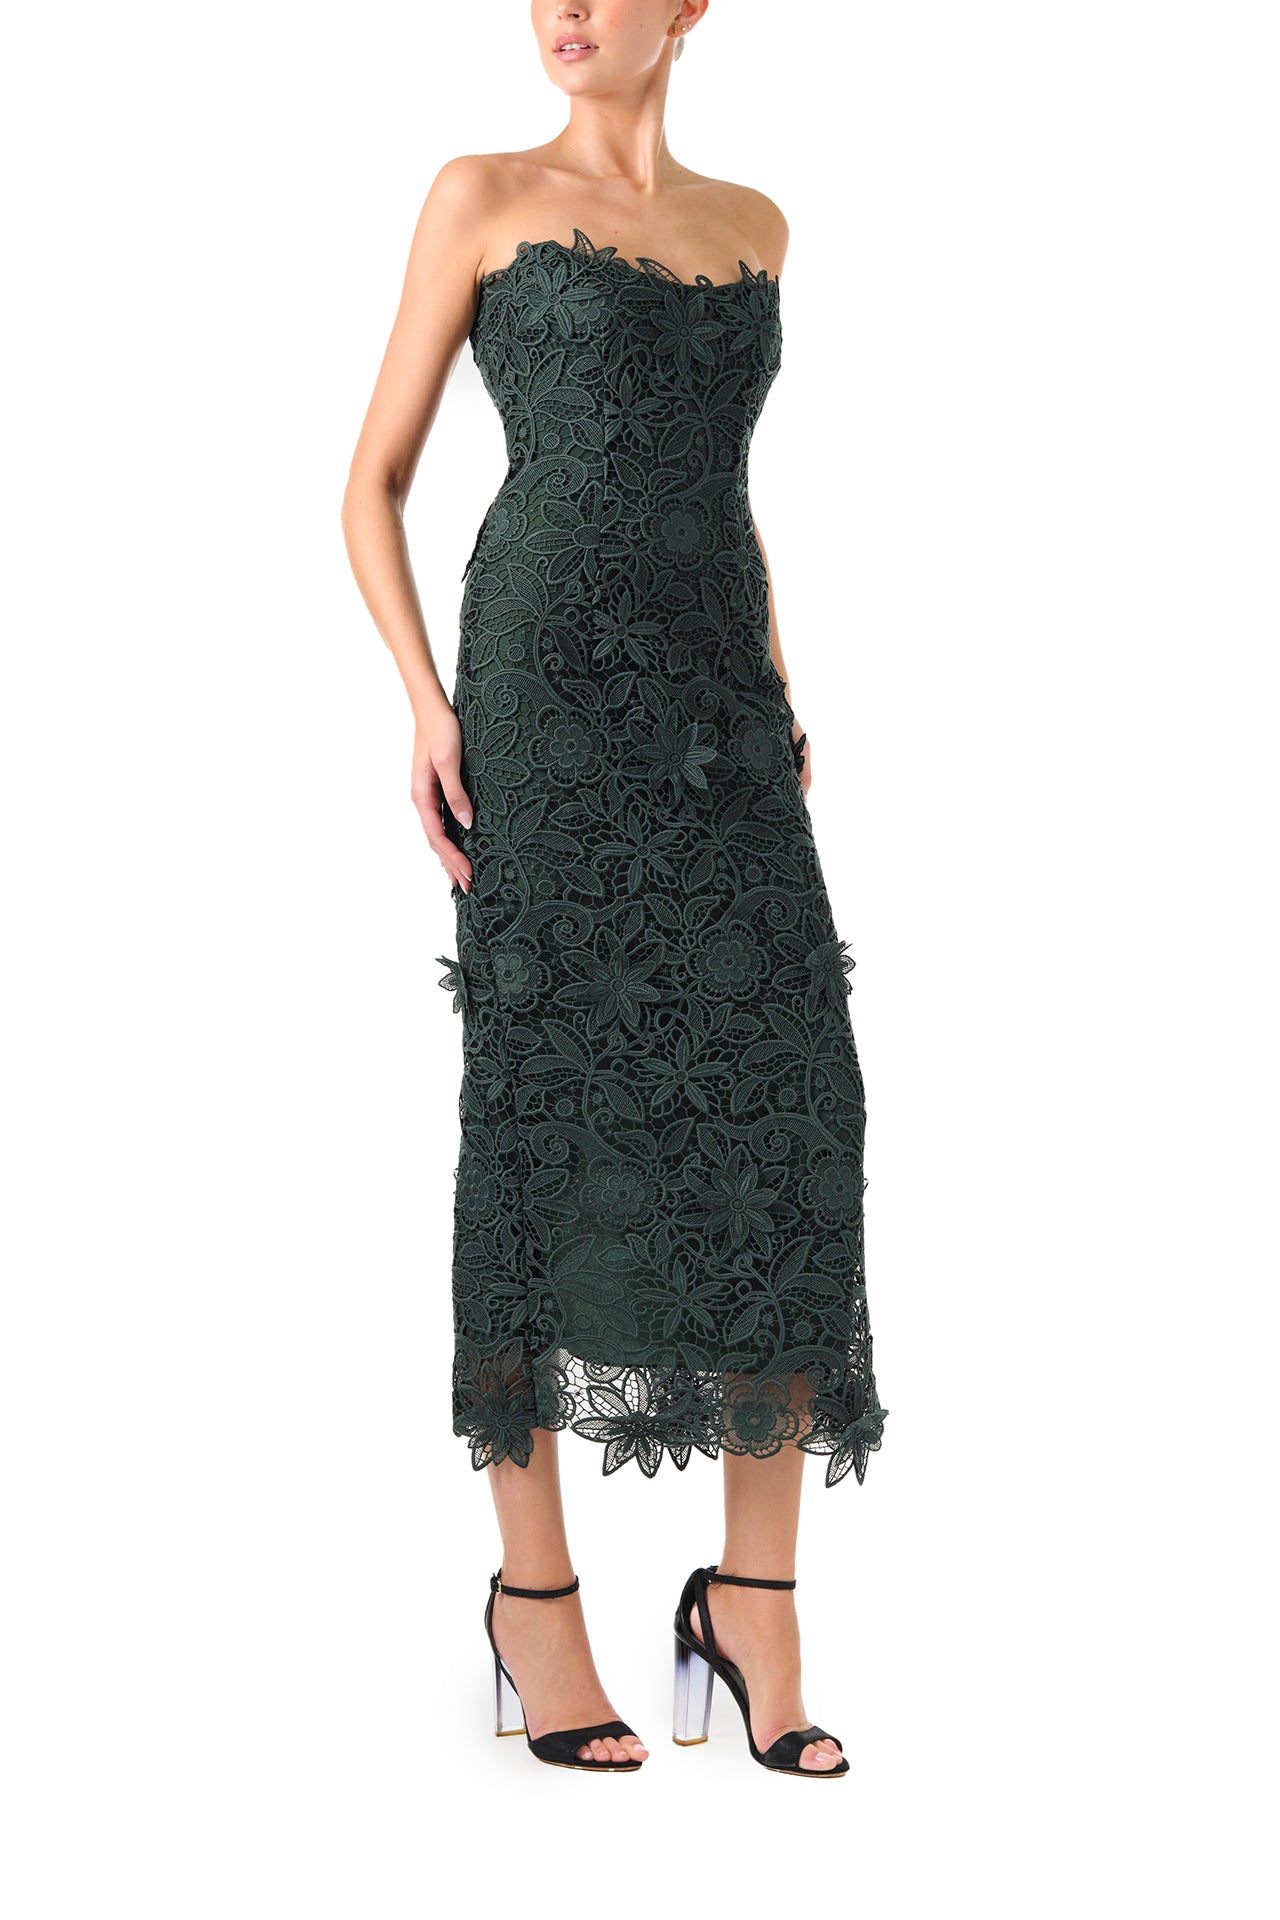 Monique Lhuillier Fall 2024 Strapless, Juniper lace sheath dress with lace scalloped neckline and hem - right side.